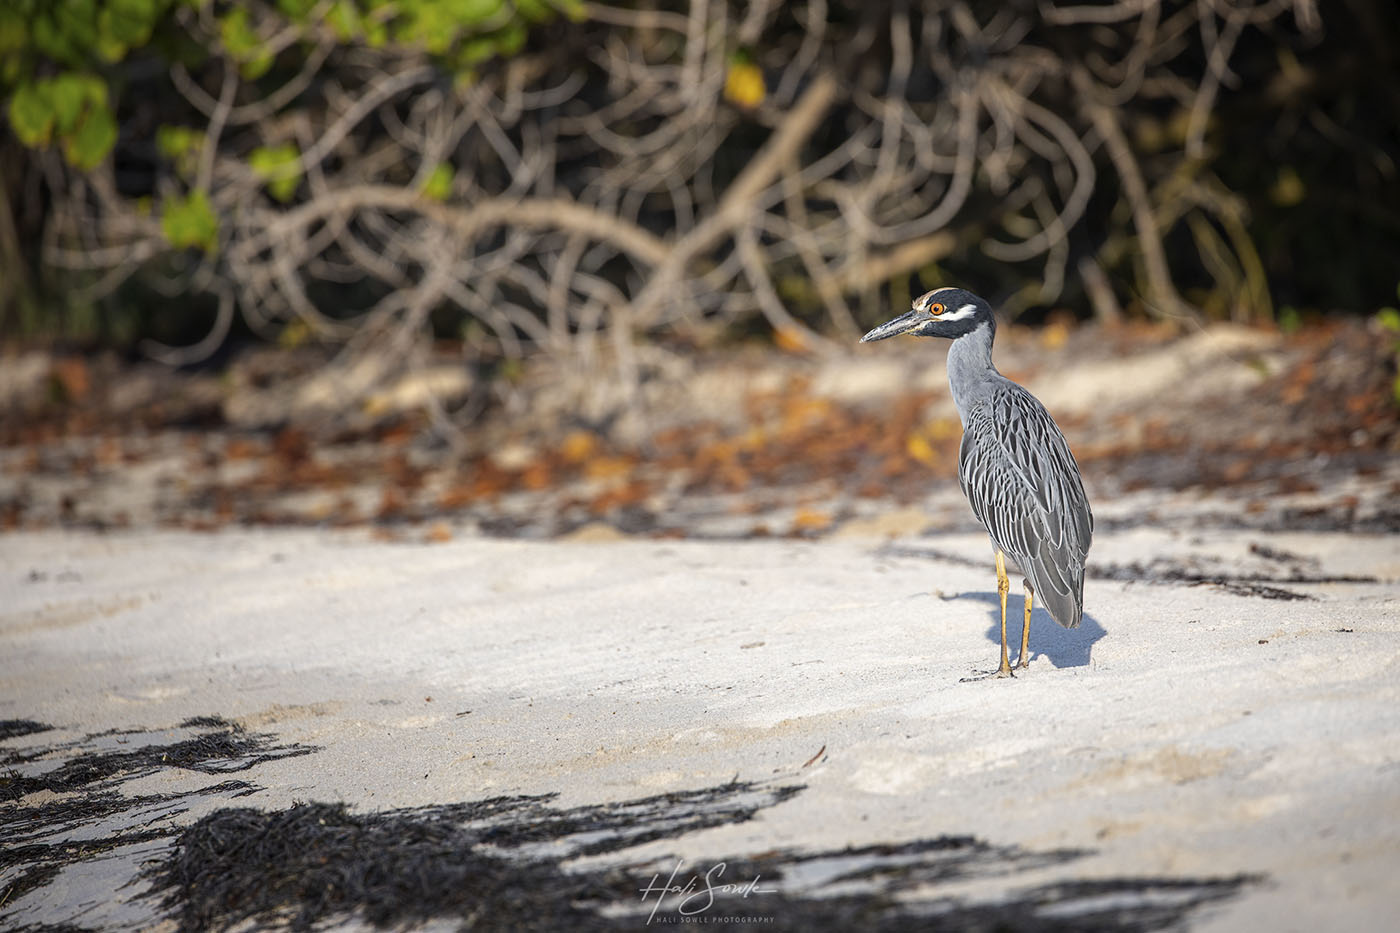 2019_09_Sandals-SouthCoast-10541-Edit1000.jpg - Every day we took multiple walks up the undeveloped area of the beach to a fallen mangrove and back.  One day we encountered this male Yellow crowned night heron, as well as a female (not shown).  The male heron was very obliging and allowed us to slowly get quite close.